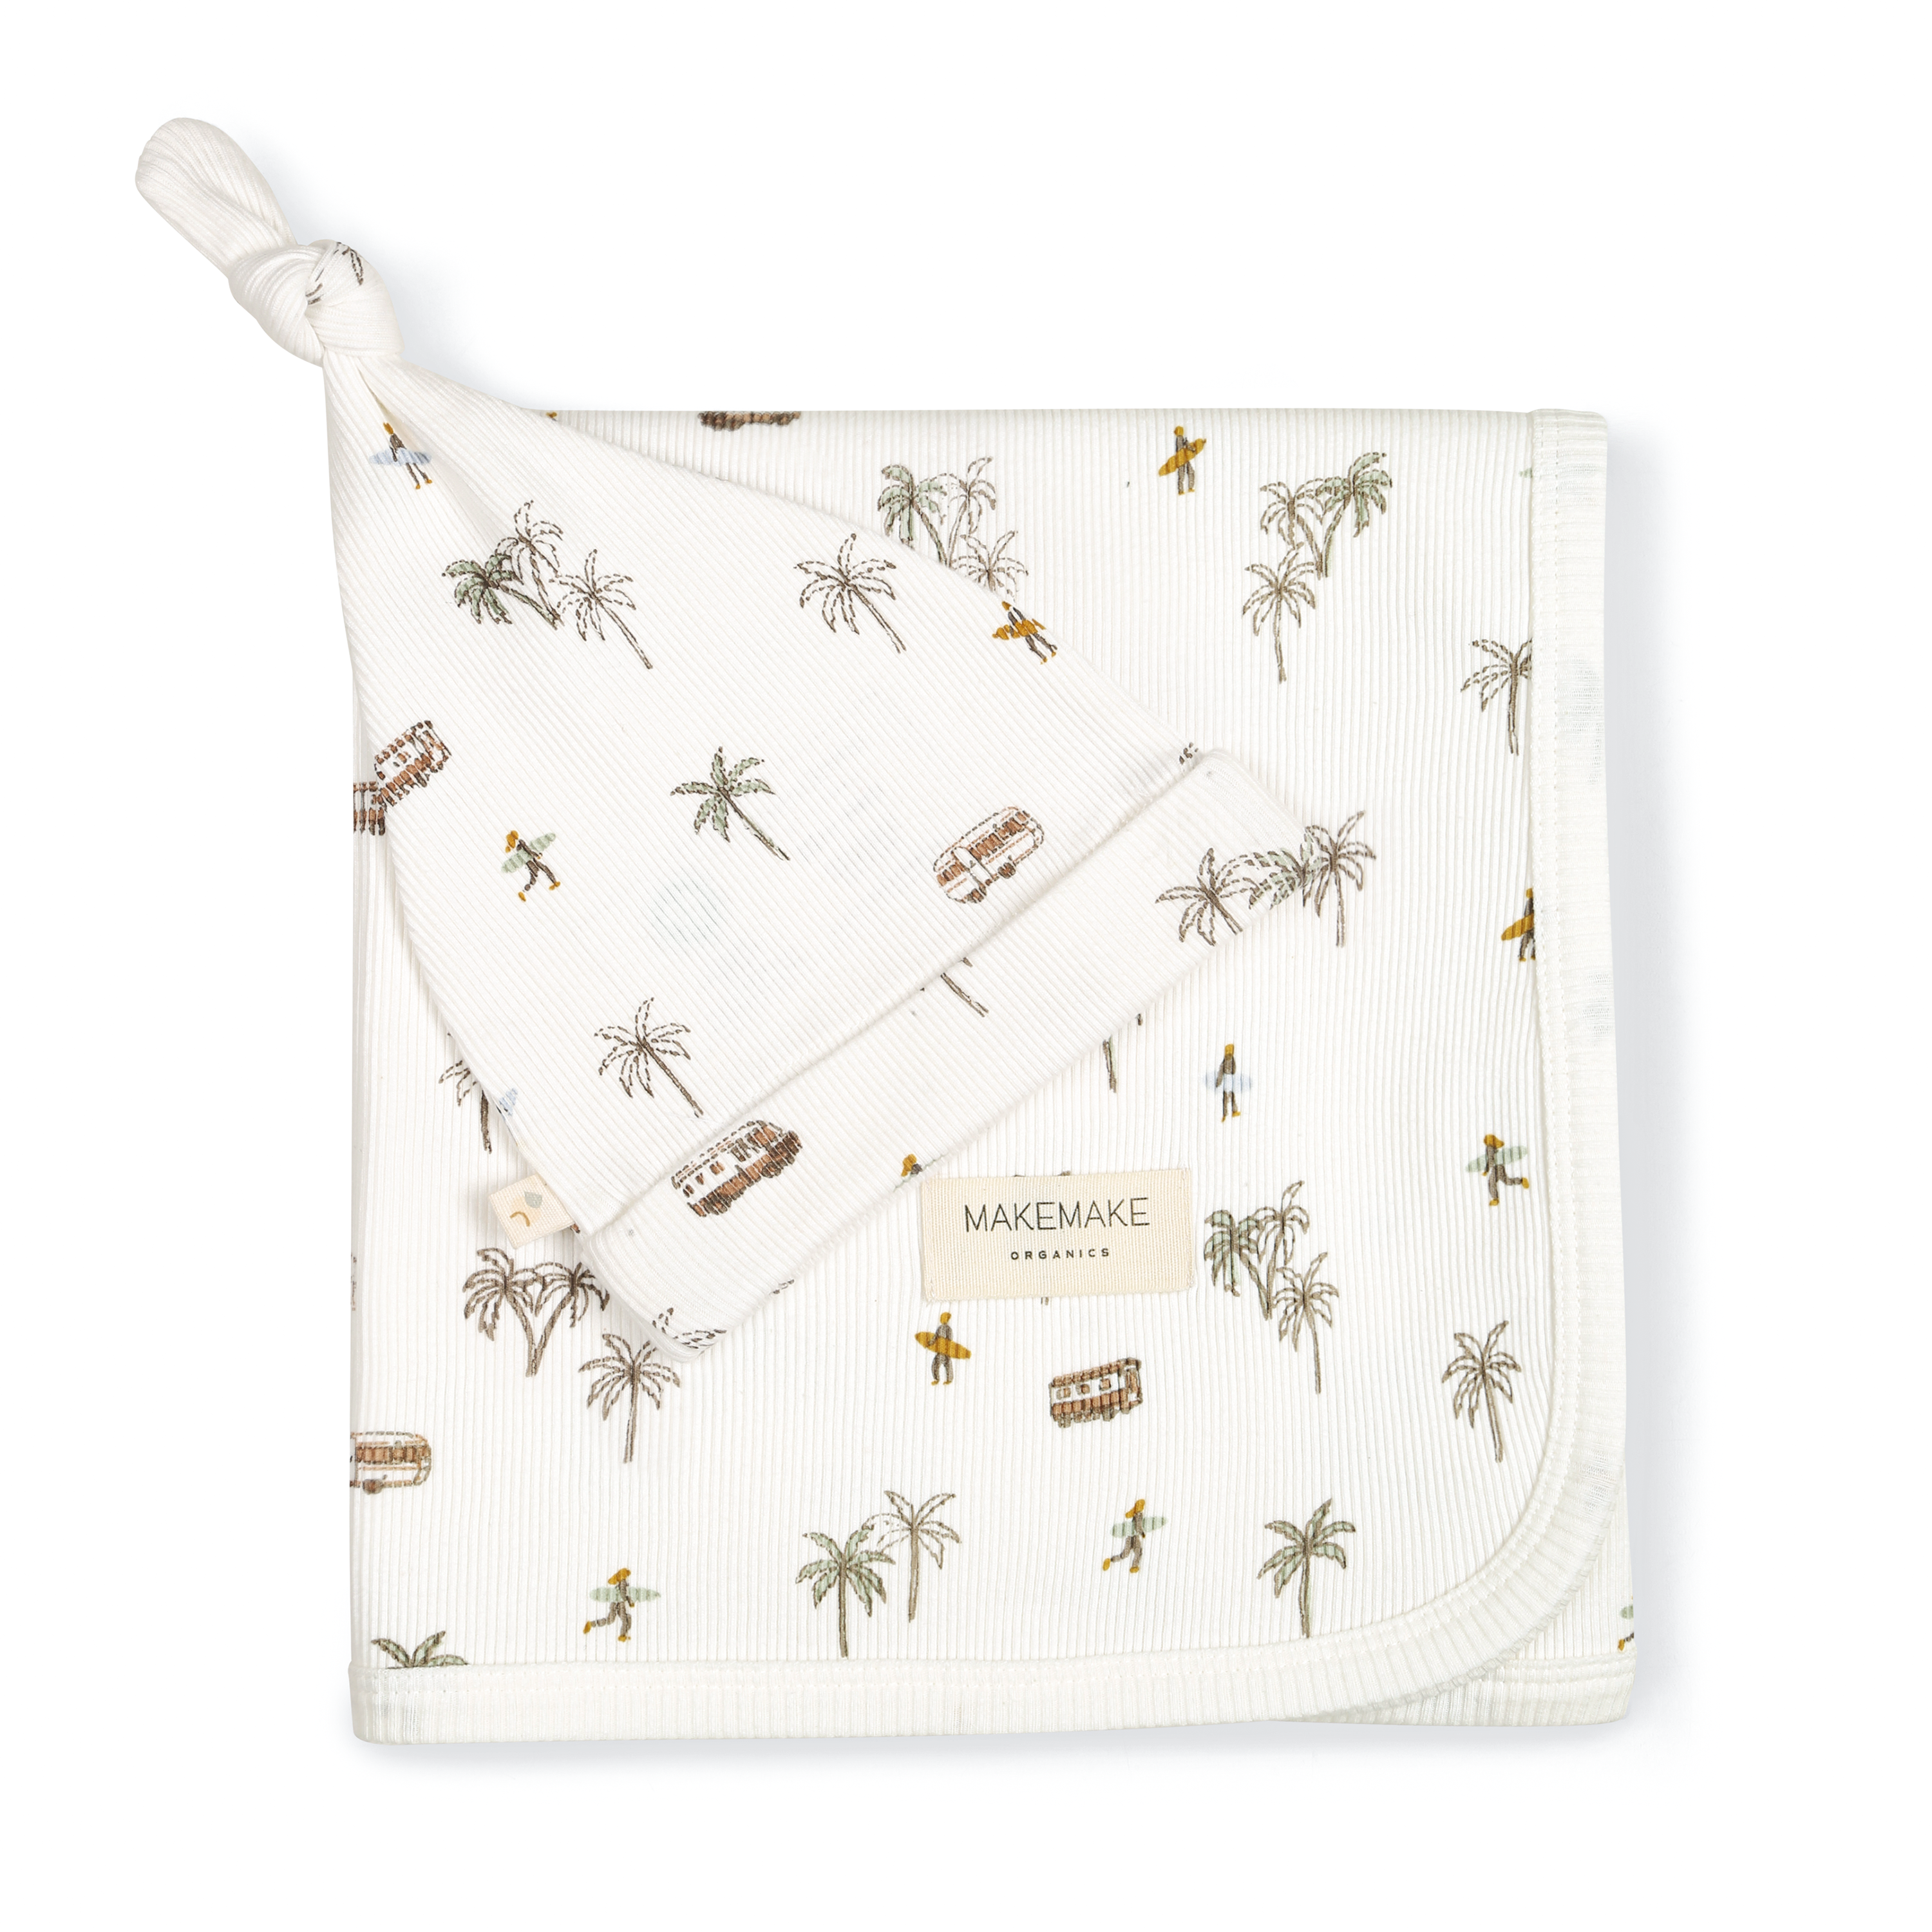 White Organic Swaddle Blanket & Hat - Malibu by Makemake Organics, with tropical-themed patterns, including palm trees and surfboards, neatly folded with a corner tied in a knot, displayed against a plain background.